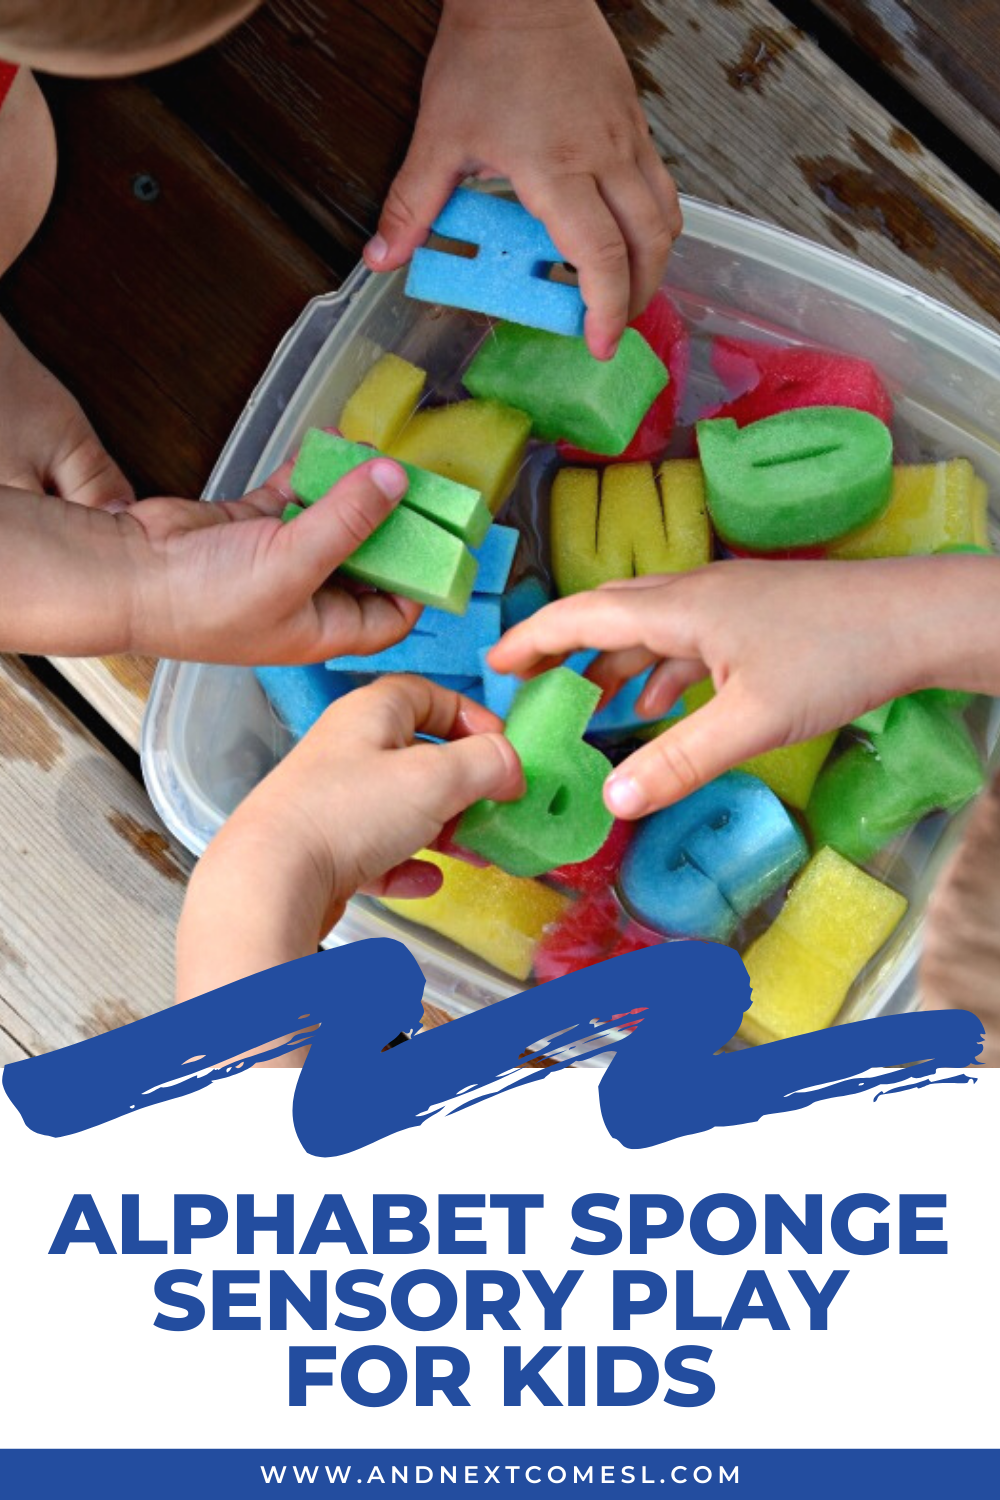 A fun sponge sensory play activity for toddlers and preschoolers using colorful letter sponges